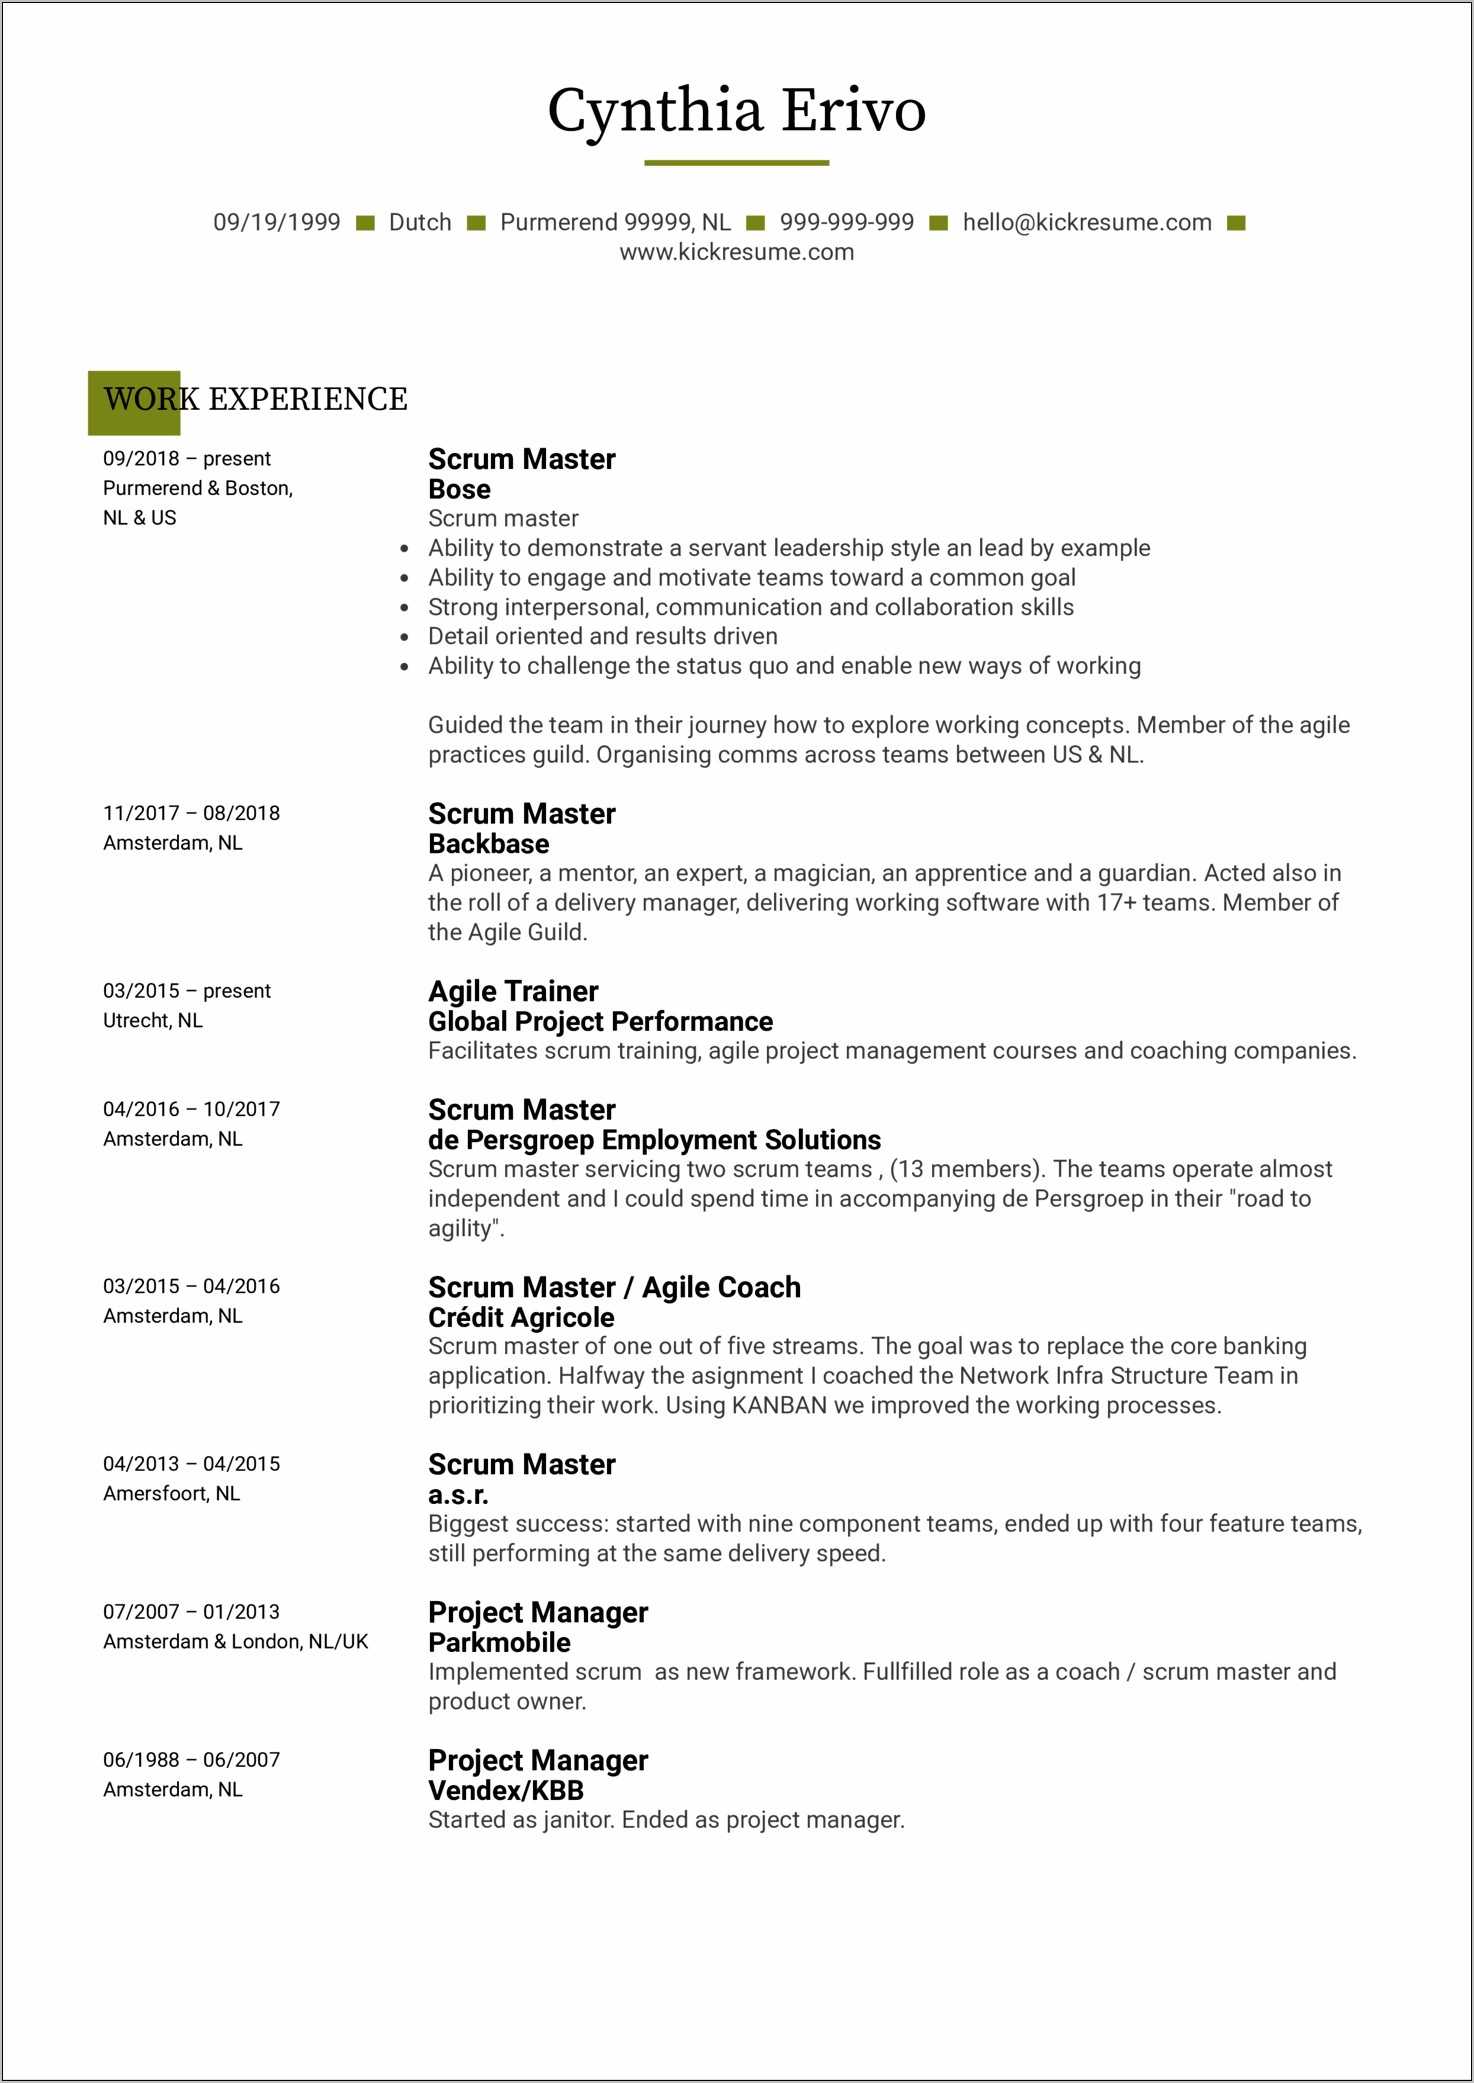 resume experience chronological order or relevance